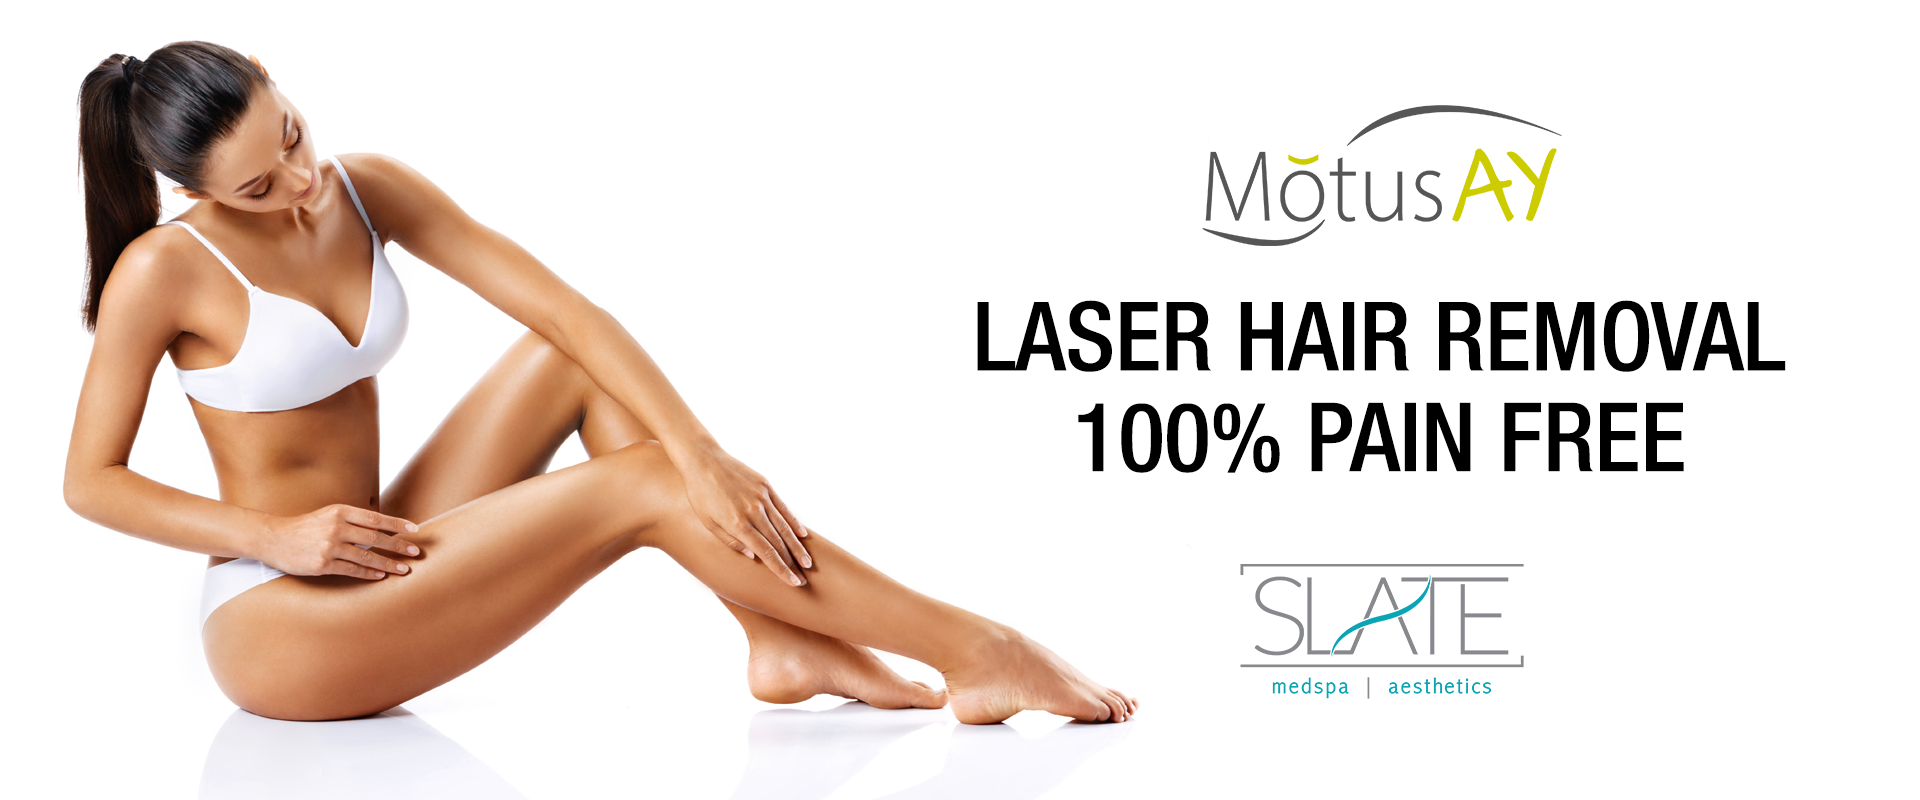 Painless Laser Hair Removal - Slate Med Spa Hair Removal Treatment